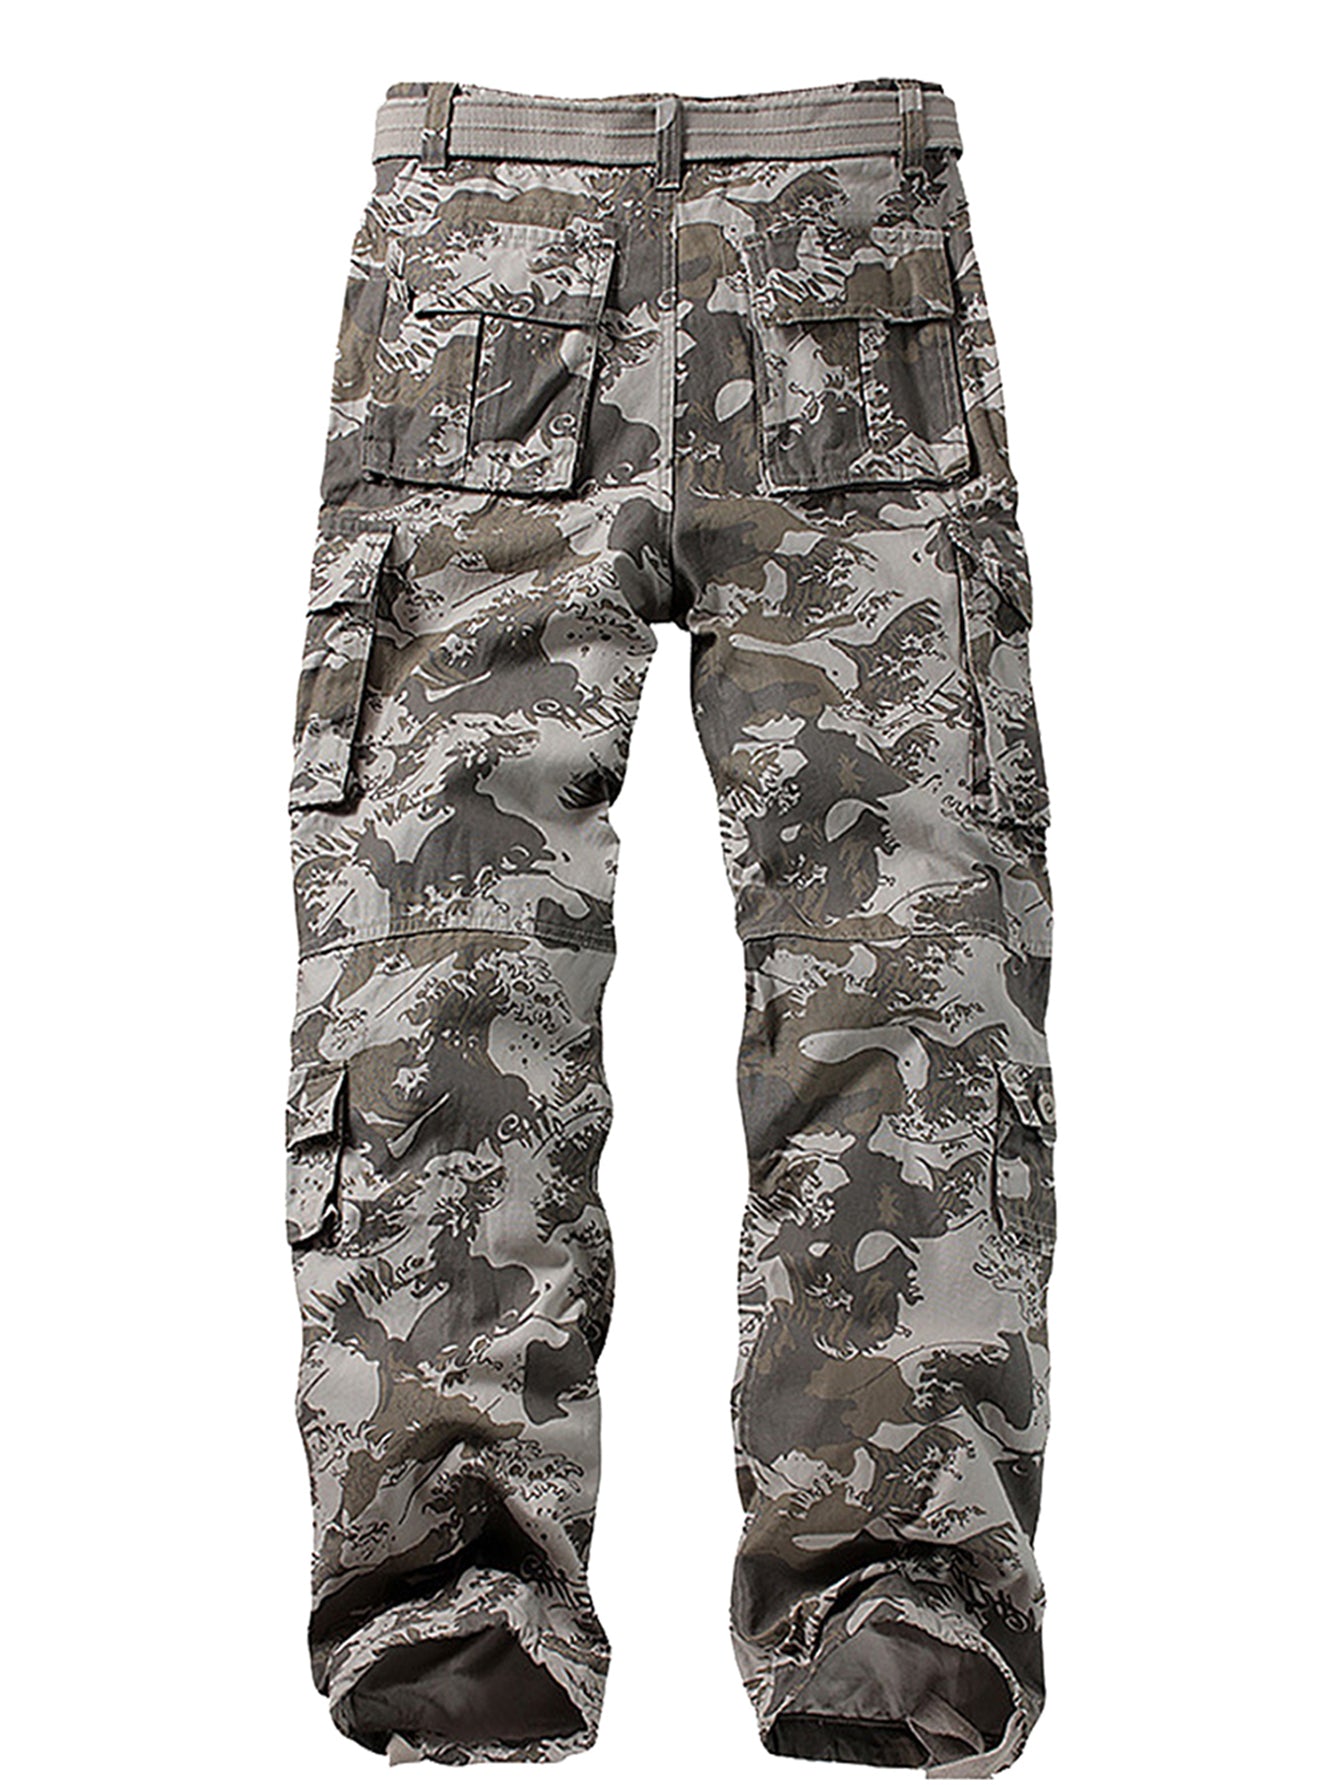 MENS CASUAL WORKWEAR CAMOUFLAGE CAMO WOODLAND OUTDOOR ARMY COMBAT TROUSERS  PANTS